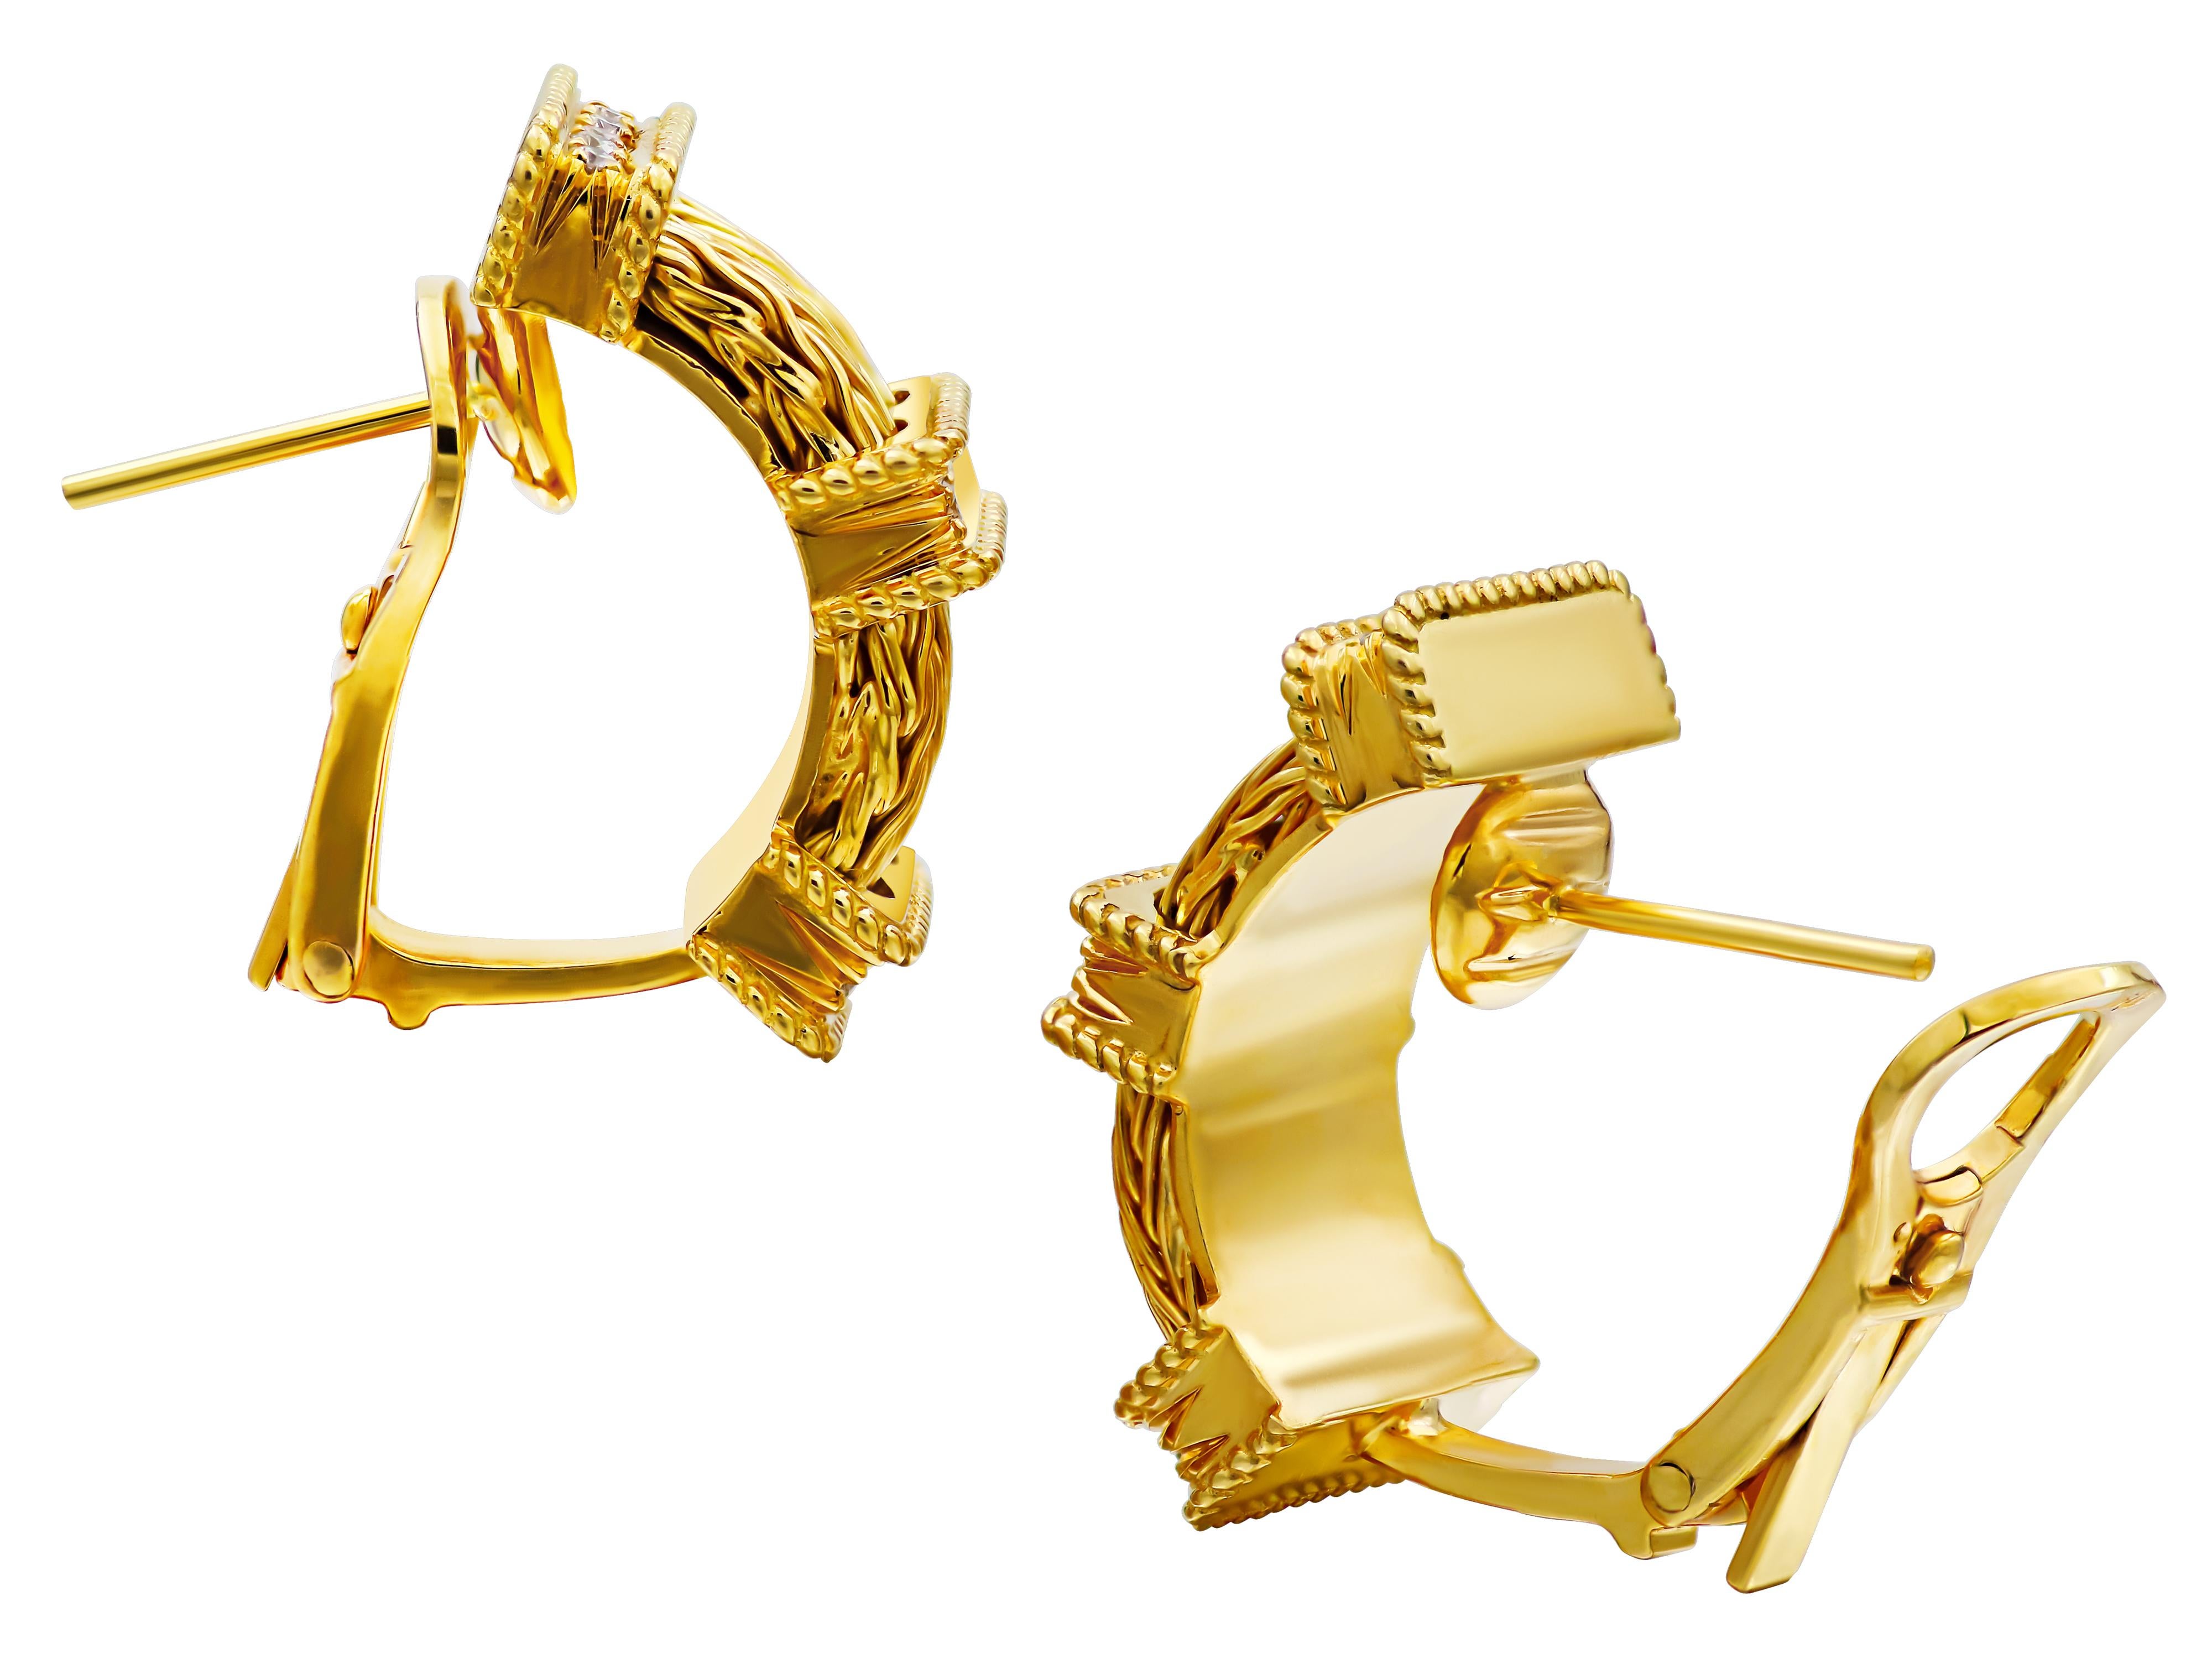 From Dimos collection these earrings in 18 karat yellow gold with a beautiful knitted double rope work and the diamond bars that complete the set and the distinct look of our earrings. The French clip with a clip and a post it’s also 18k  that help